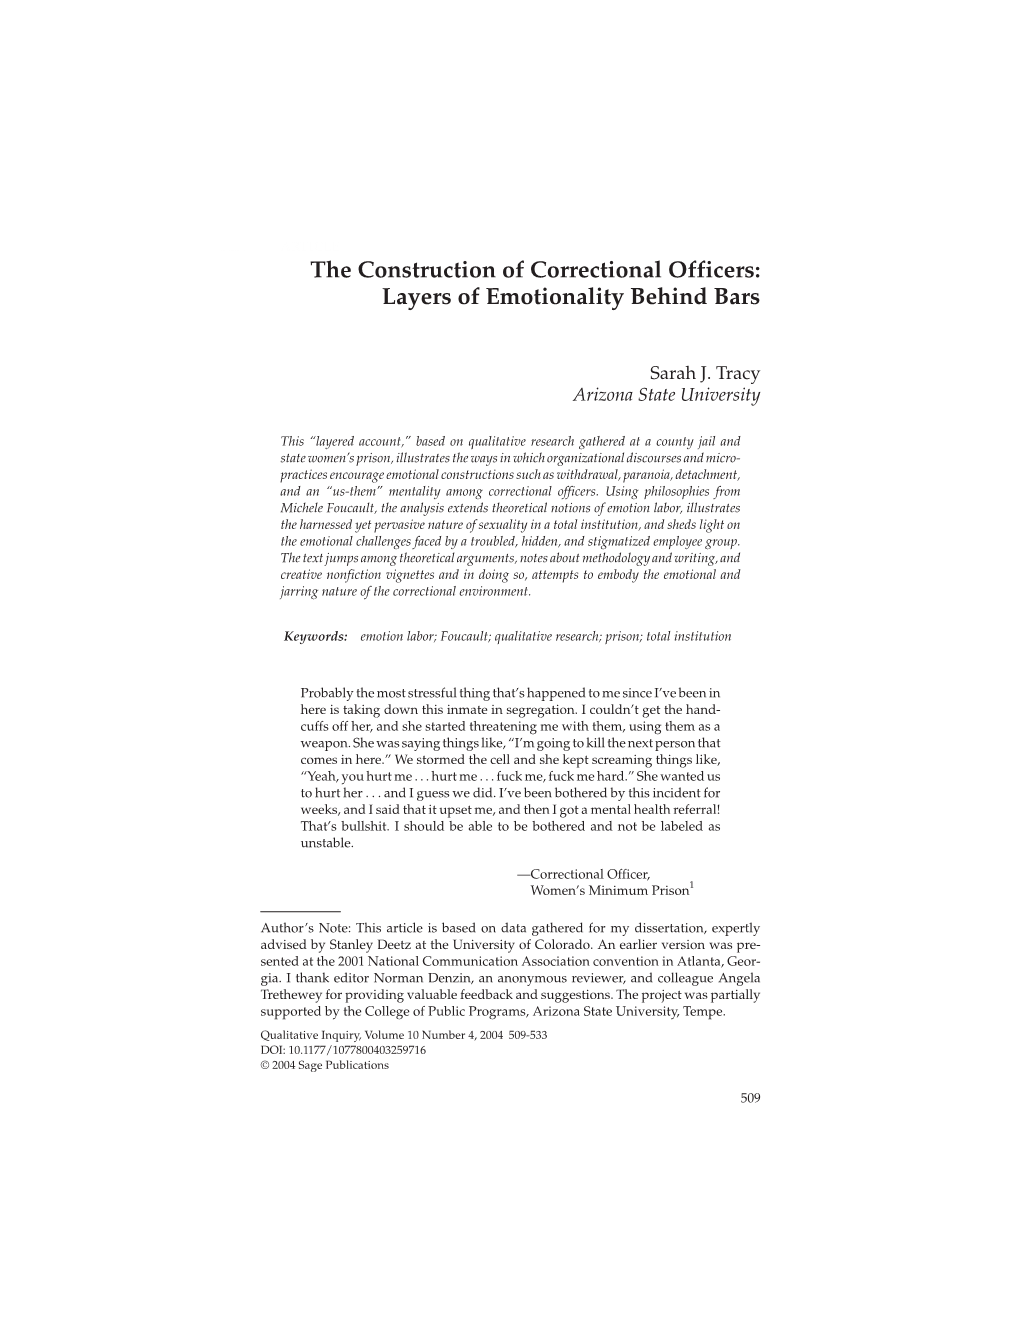 The Construction of Correctional Officers: Layers of Emotionality Behind Bars